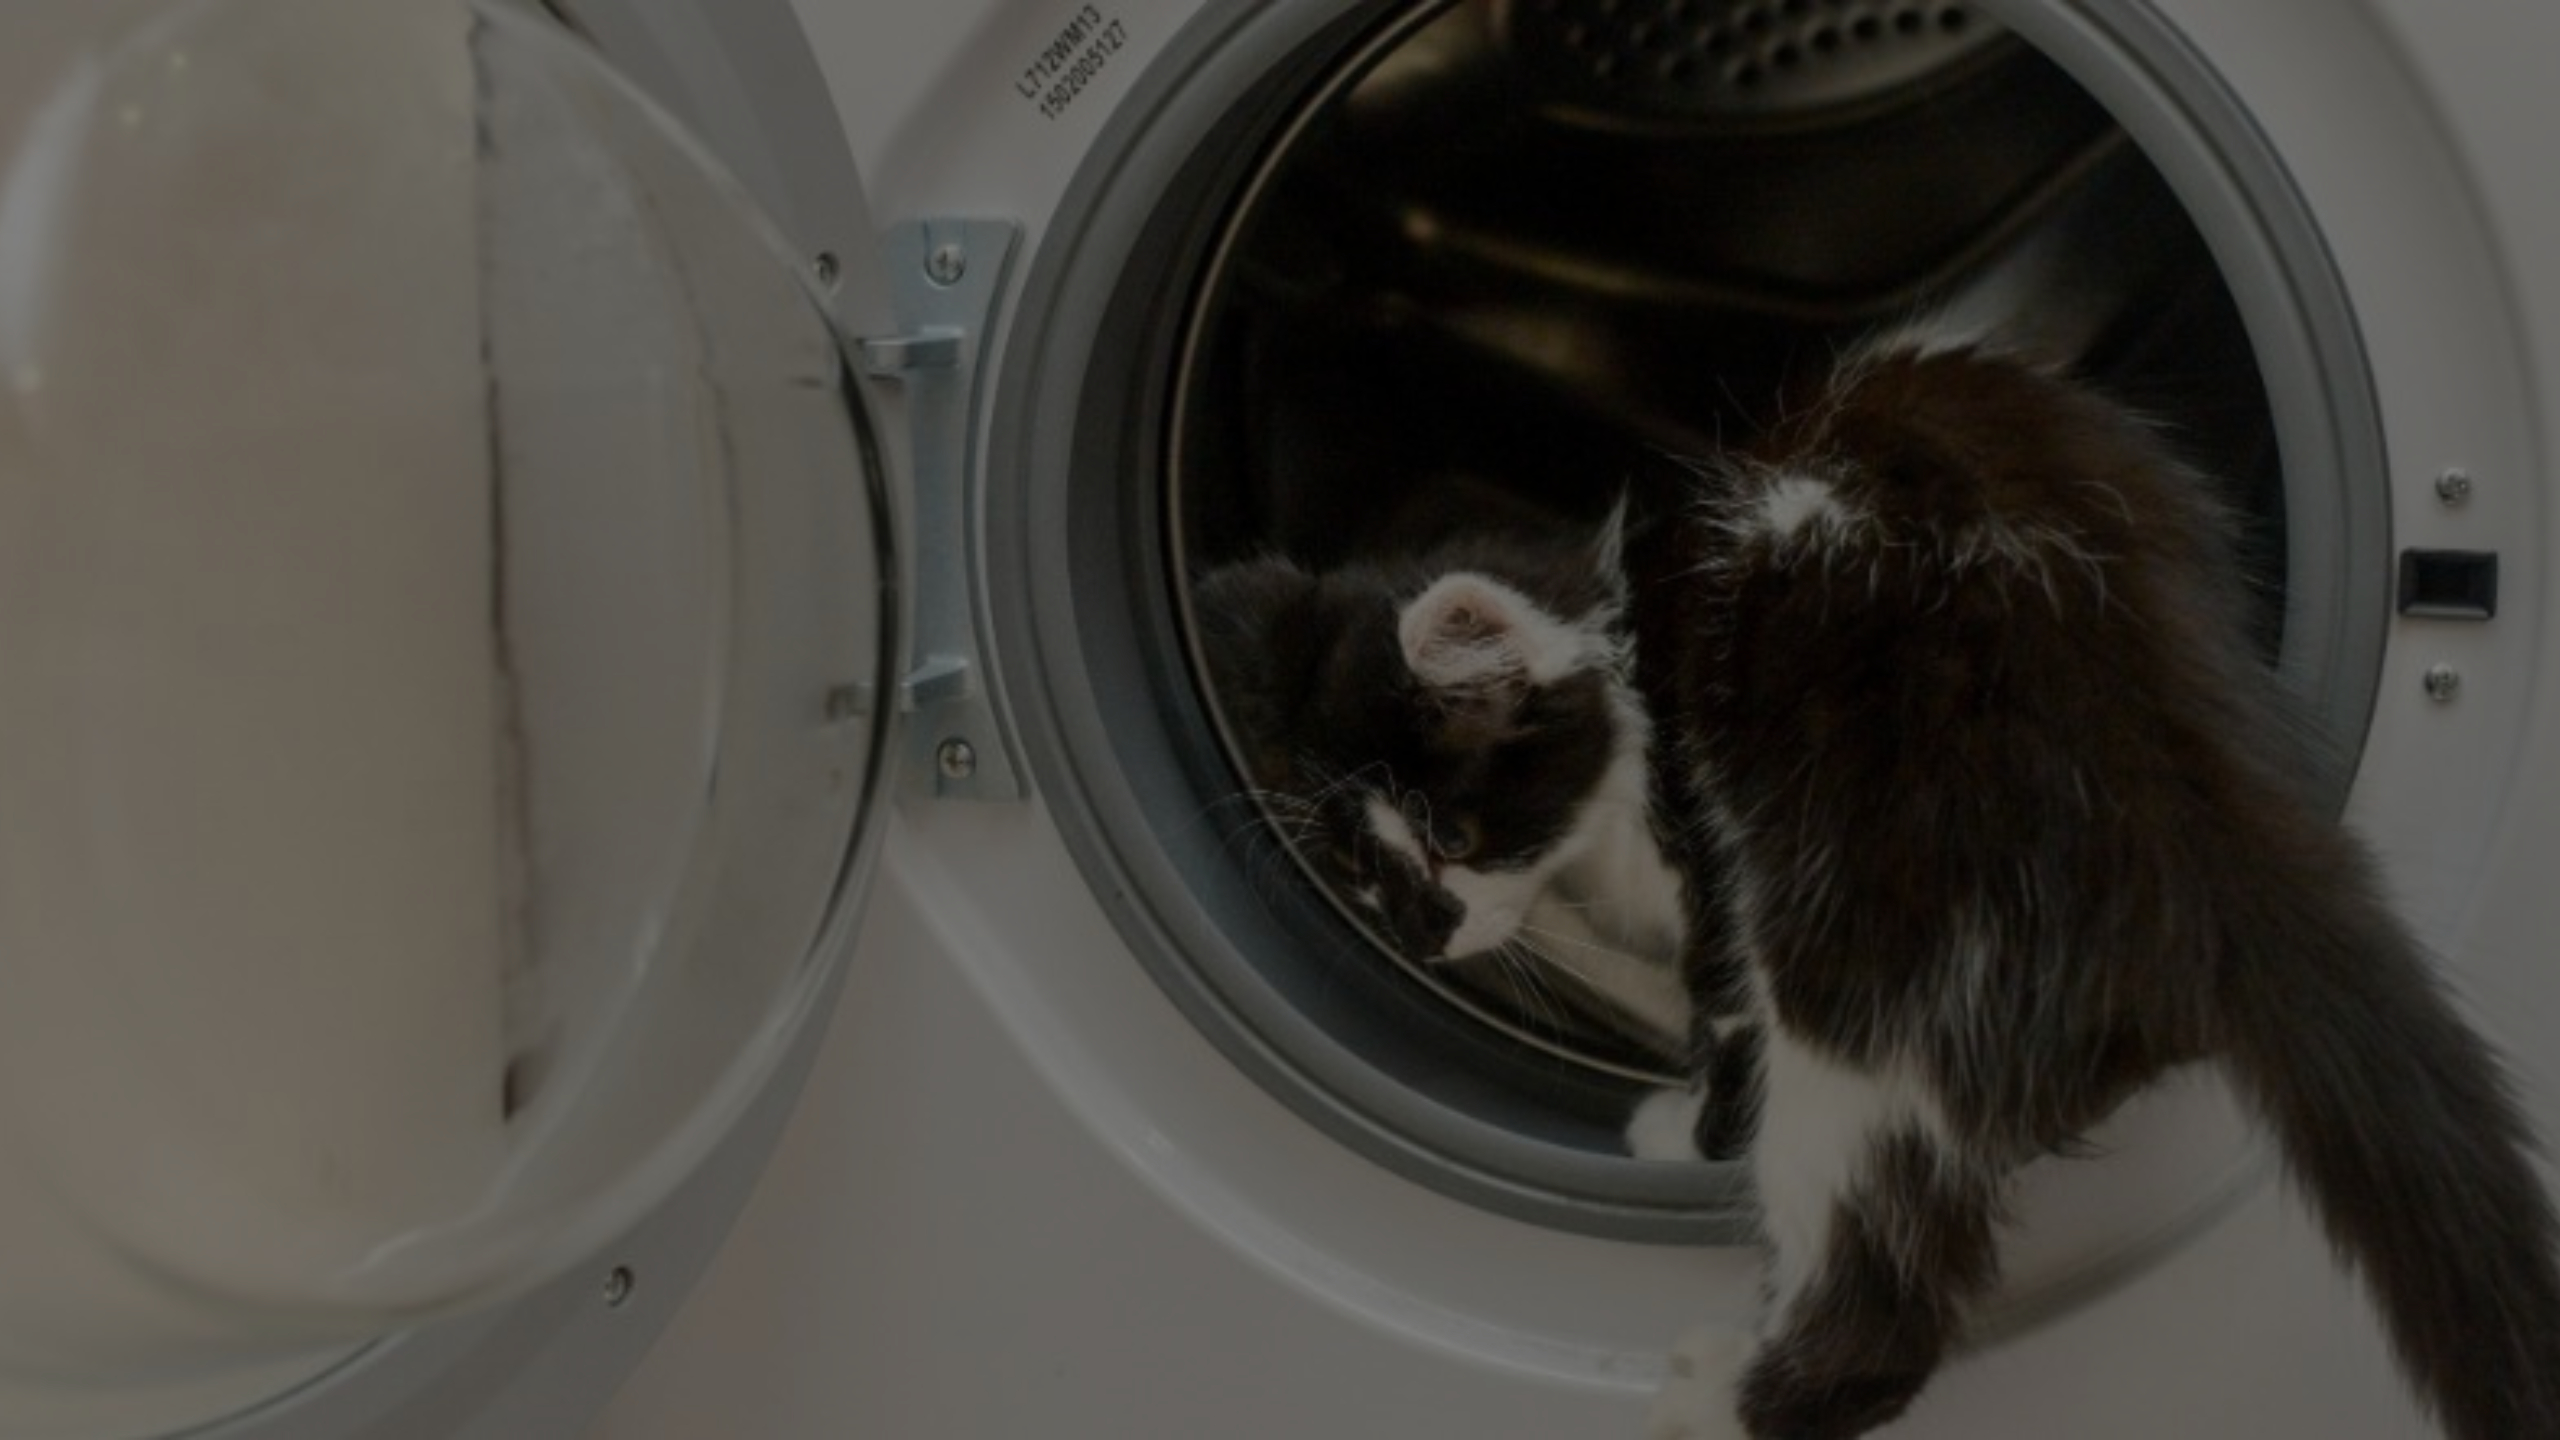 I Accidentally Killed My Cat in the Dryer Featured Images